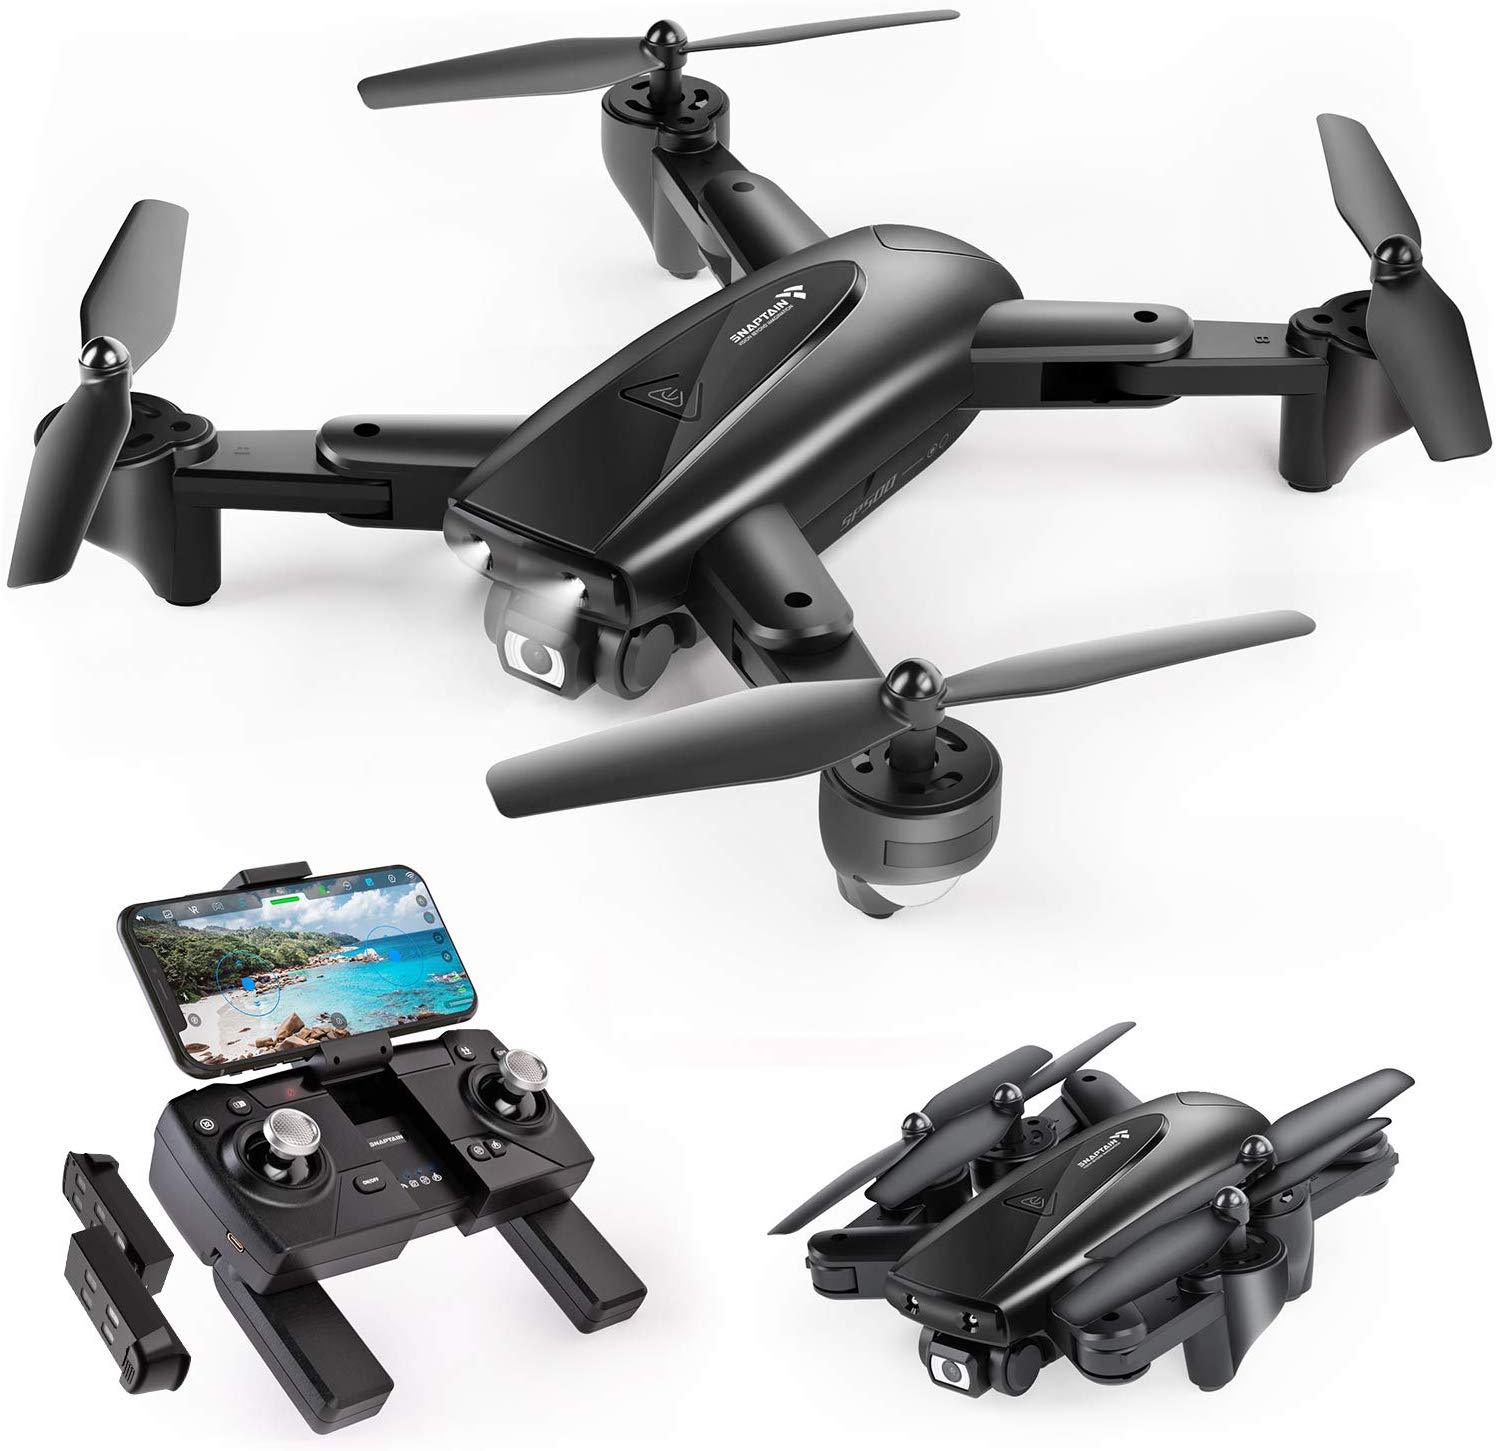 SNAPTAIN SP500 GPS FPV Drone with 2K Camera Live Video for Beginners, Foldable RC Quadcopter with GPS Return Home, Follow Me, Gesture Control, Auto Hover & 5G Wifi Transmission, Black - image 1 of 9